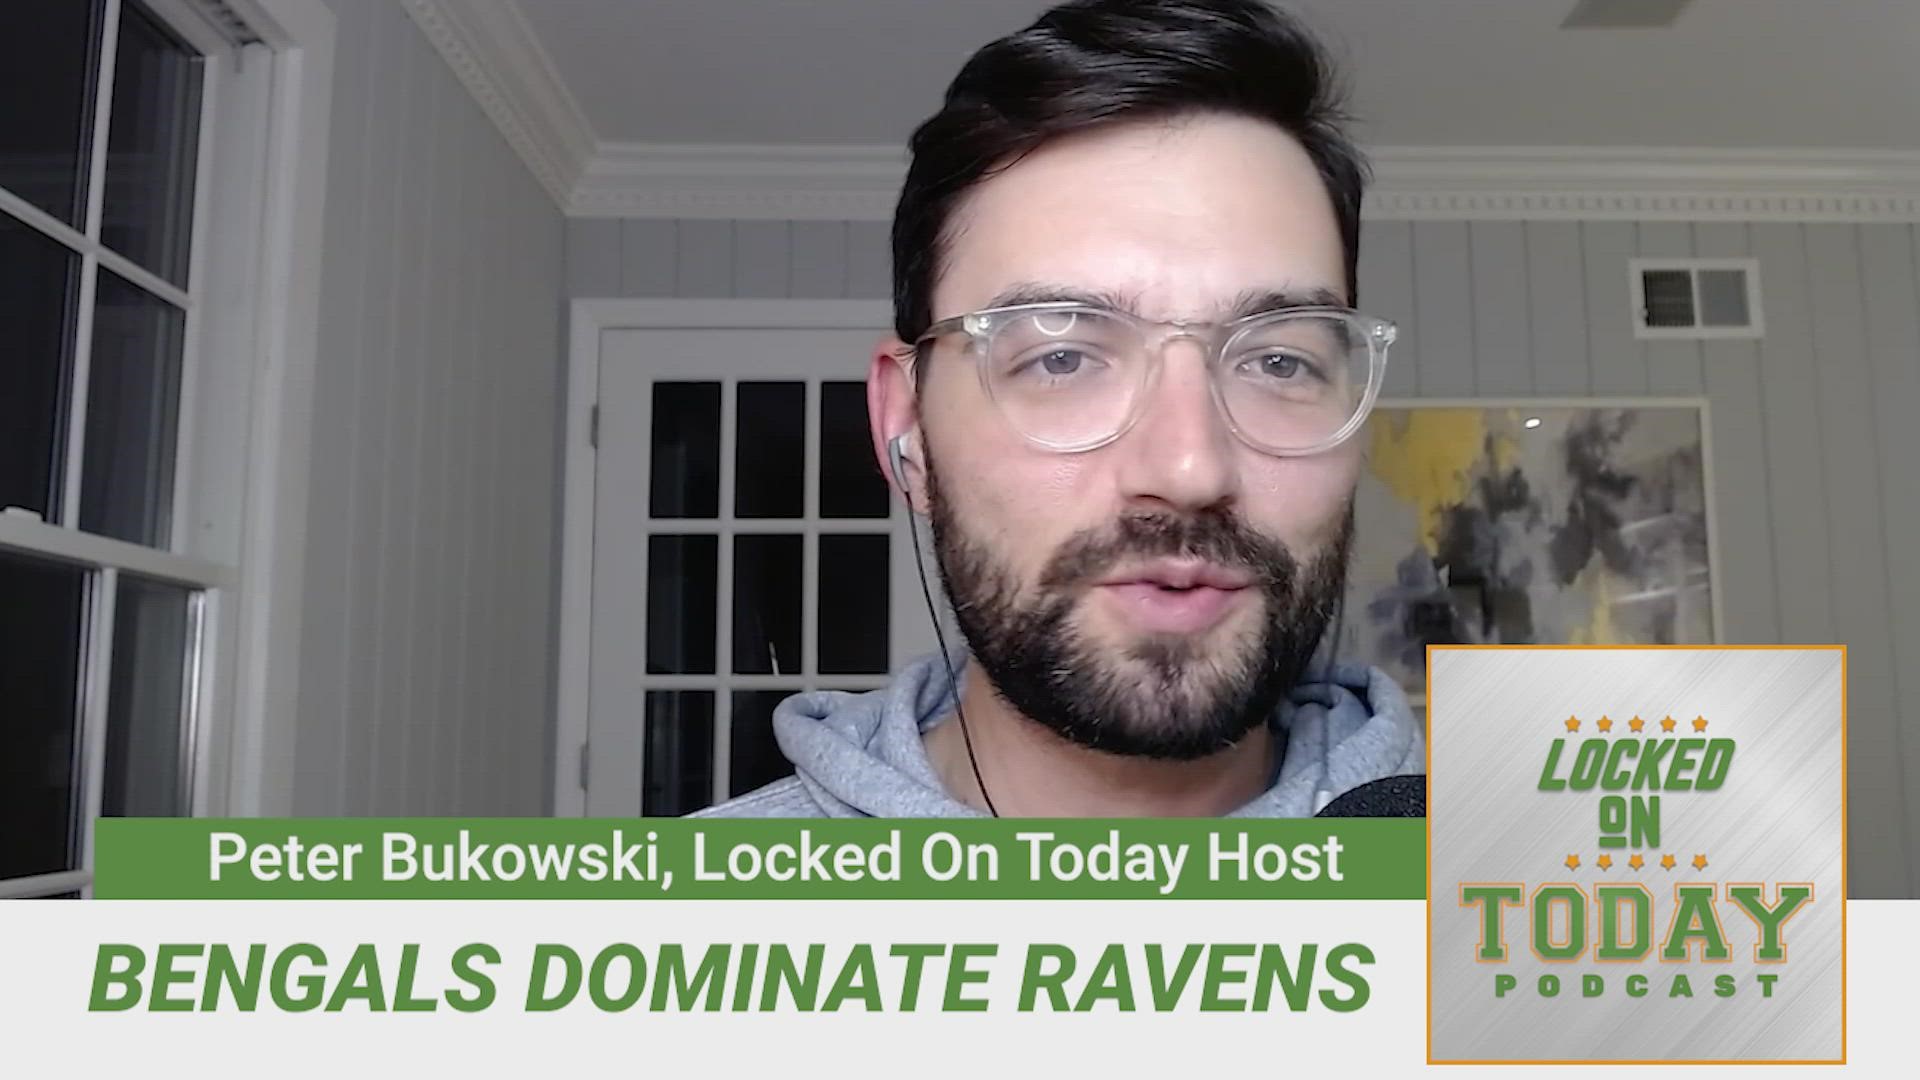 Jake Liscow of the Locked On Bengals podcast joins Peter Bukowski on the Locked On Today podcast to talk Bengals-Ravens, Ja'Marr Chase and Cincinnati's defense.